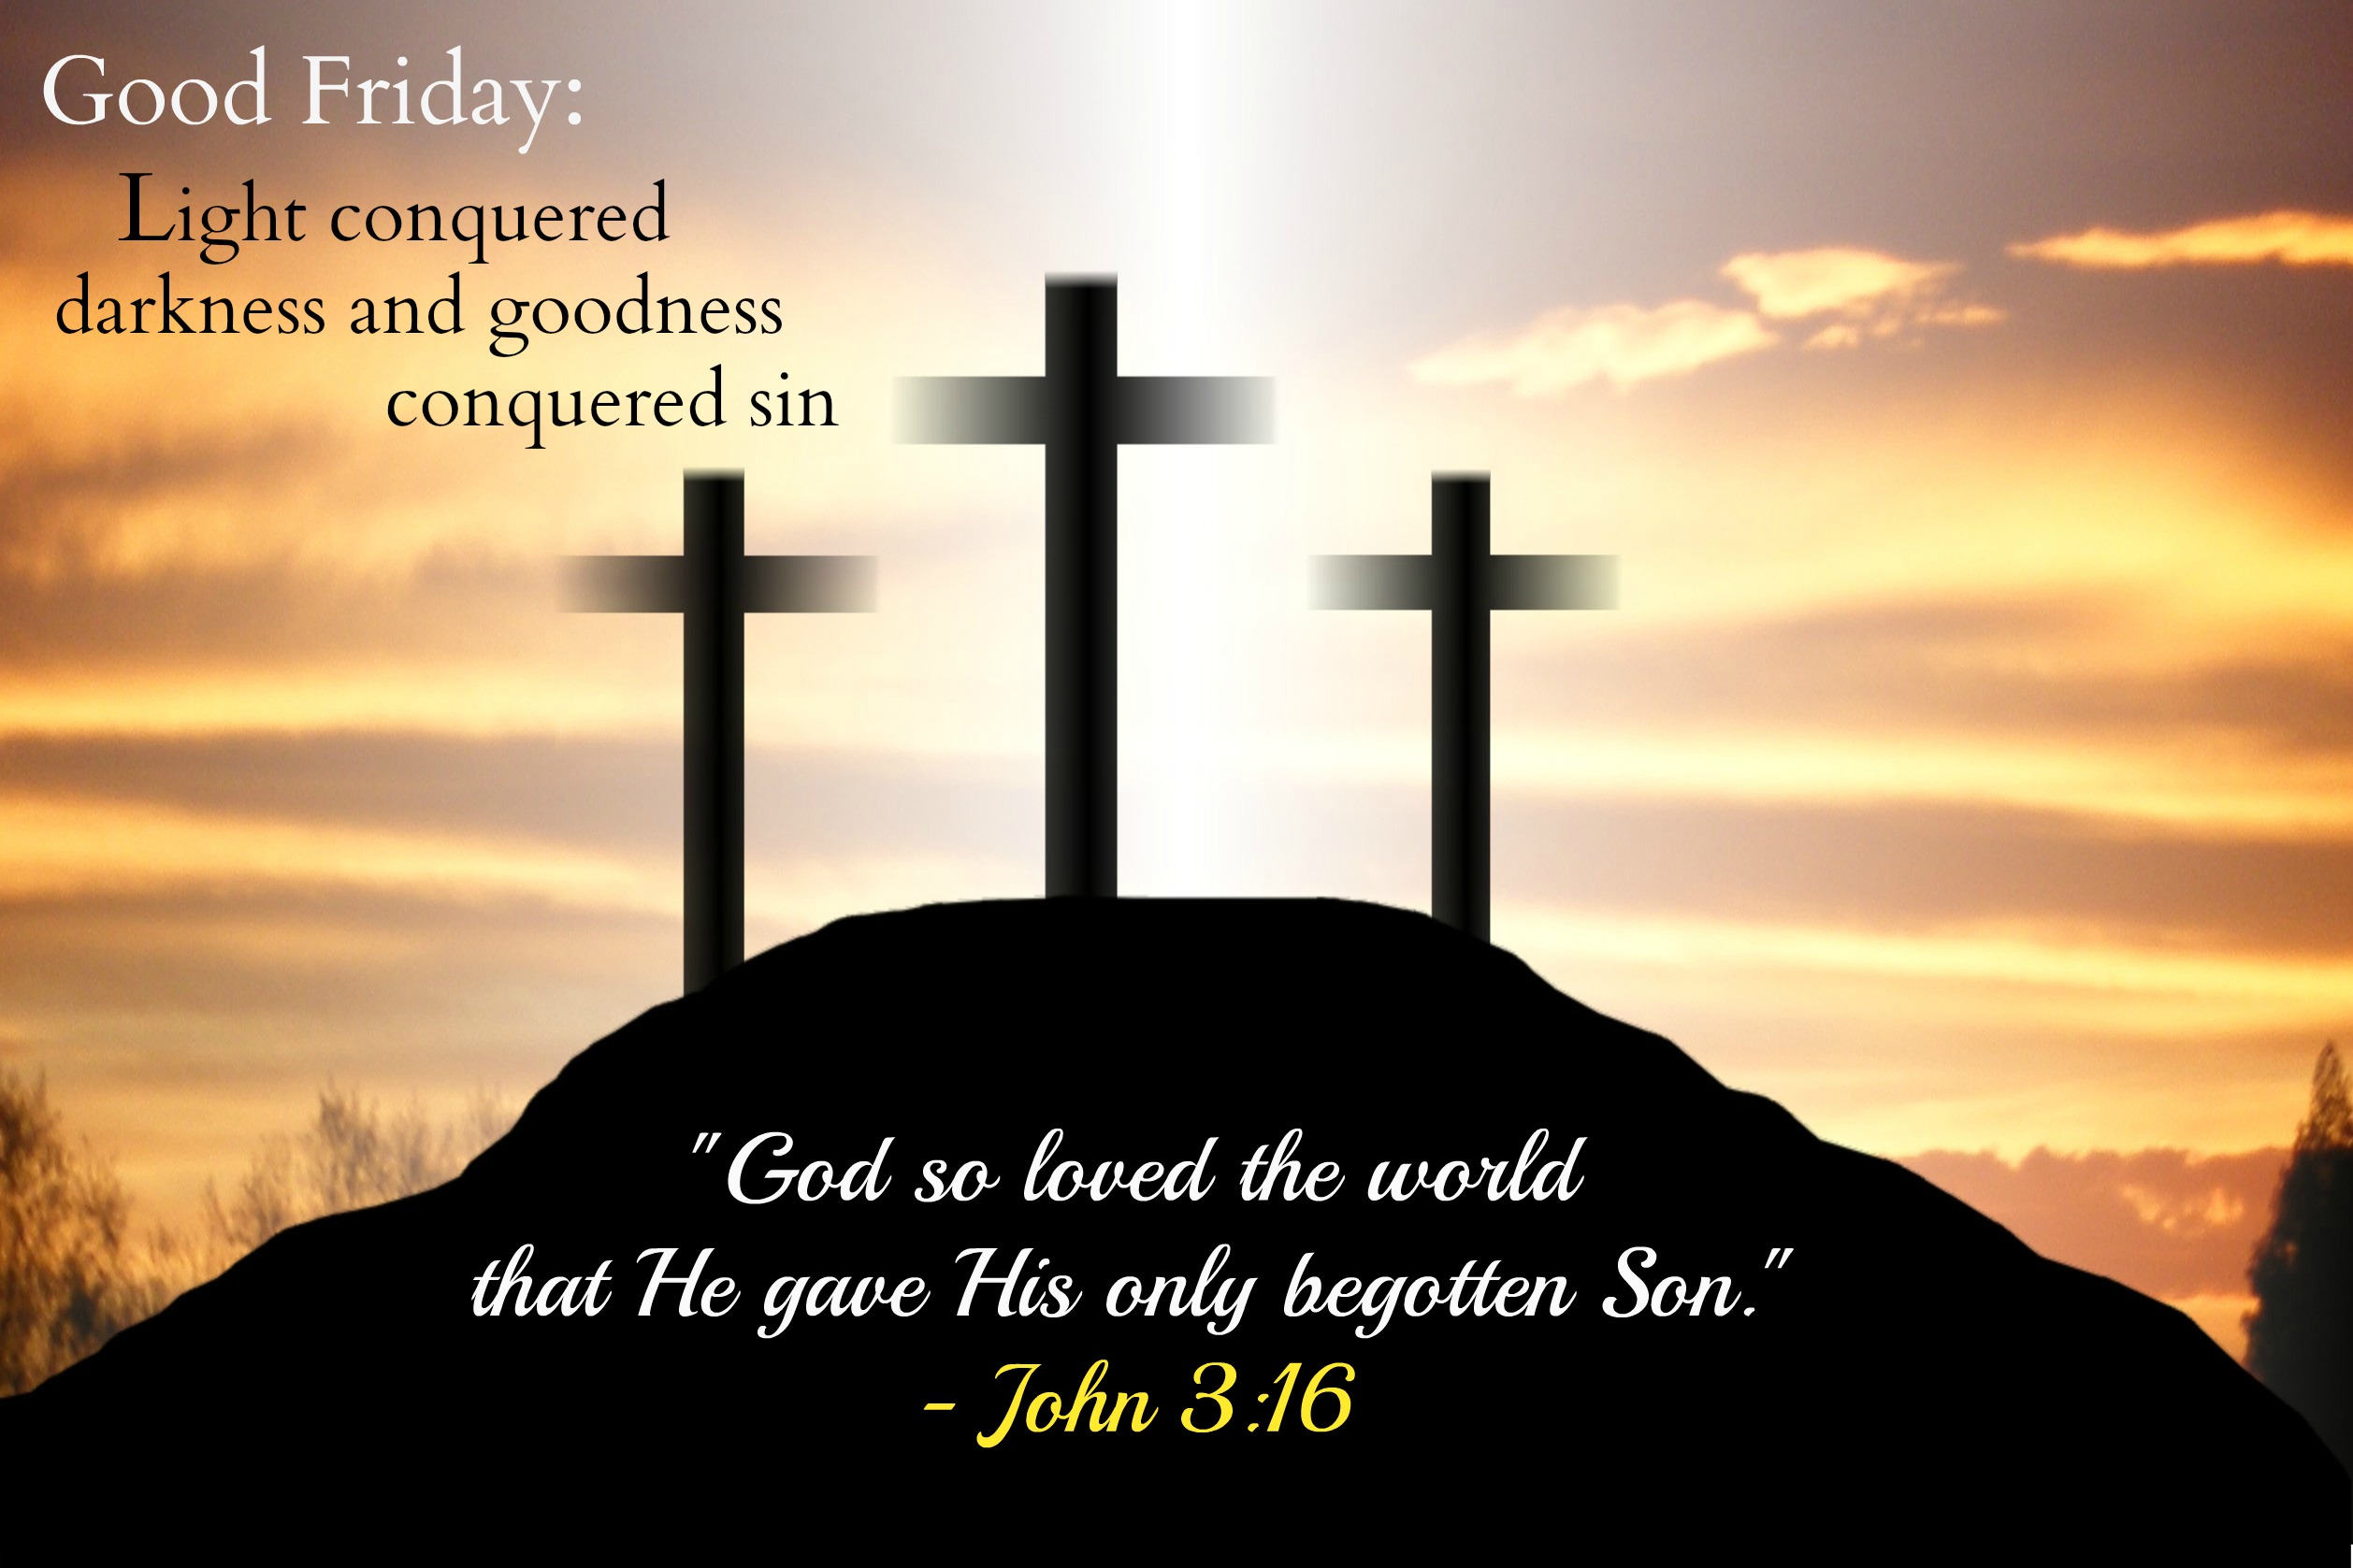 Good Friday Background Wallpapers 